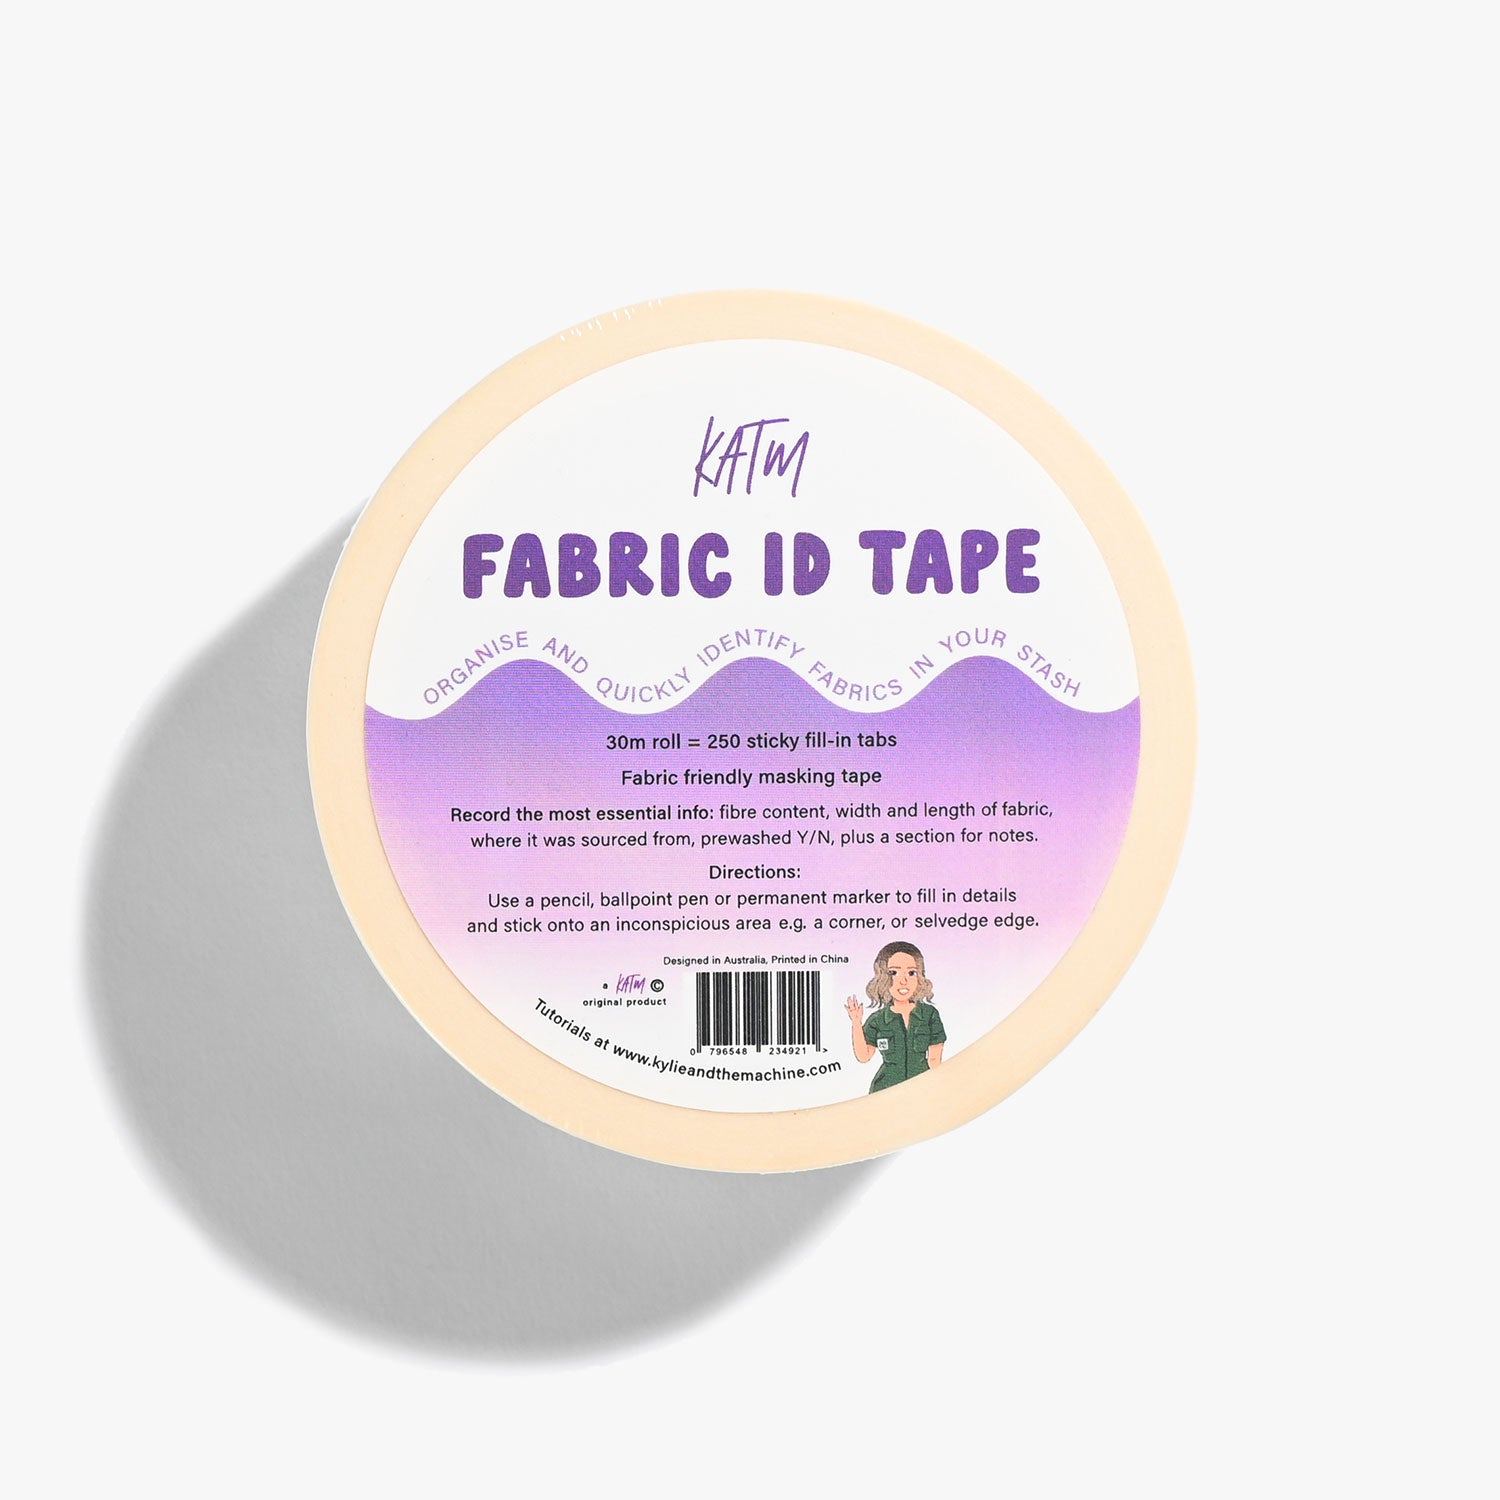 Fabric ID Tape by Kylie and The Machine